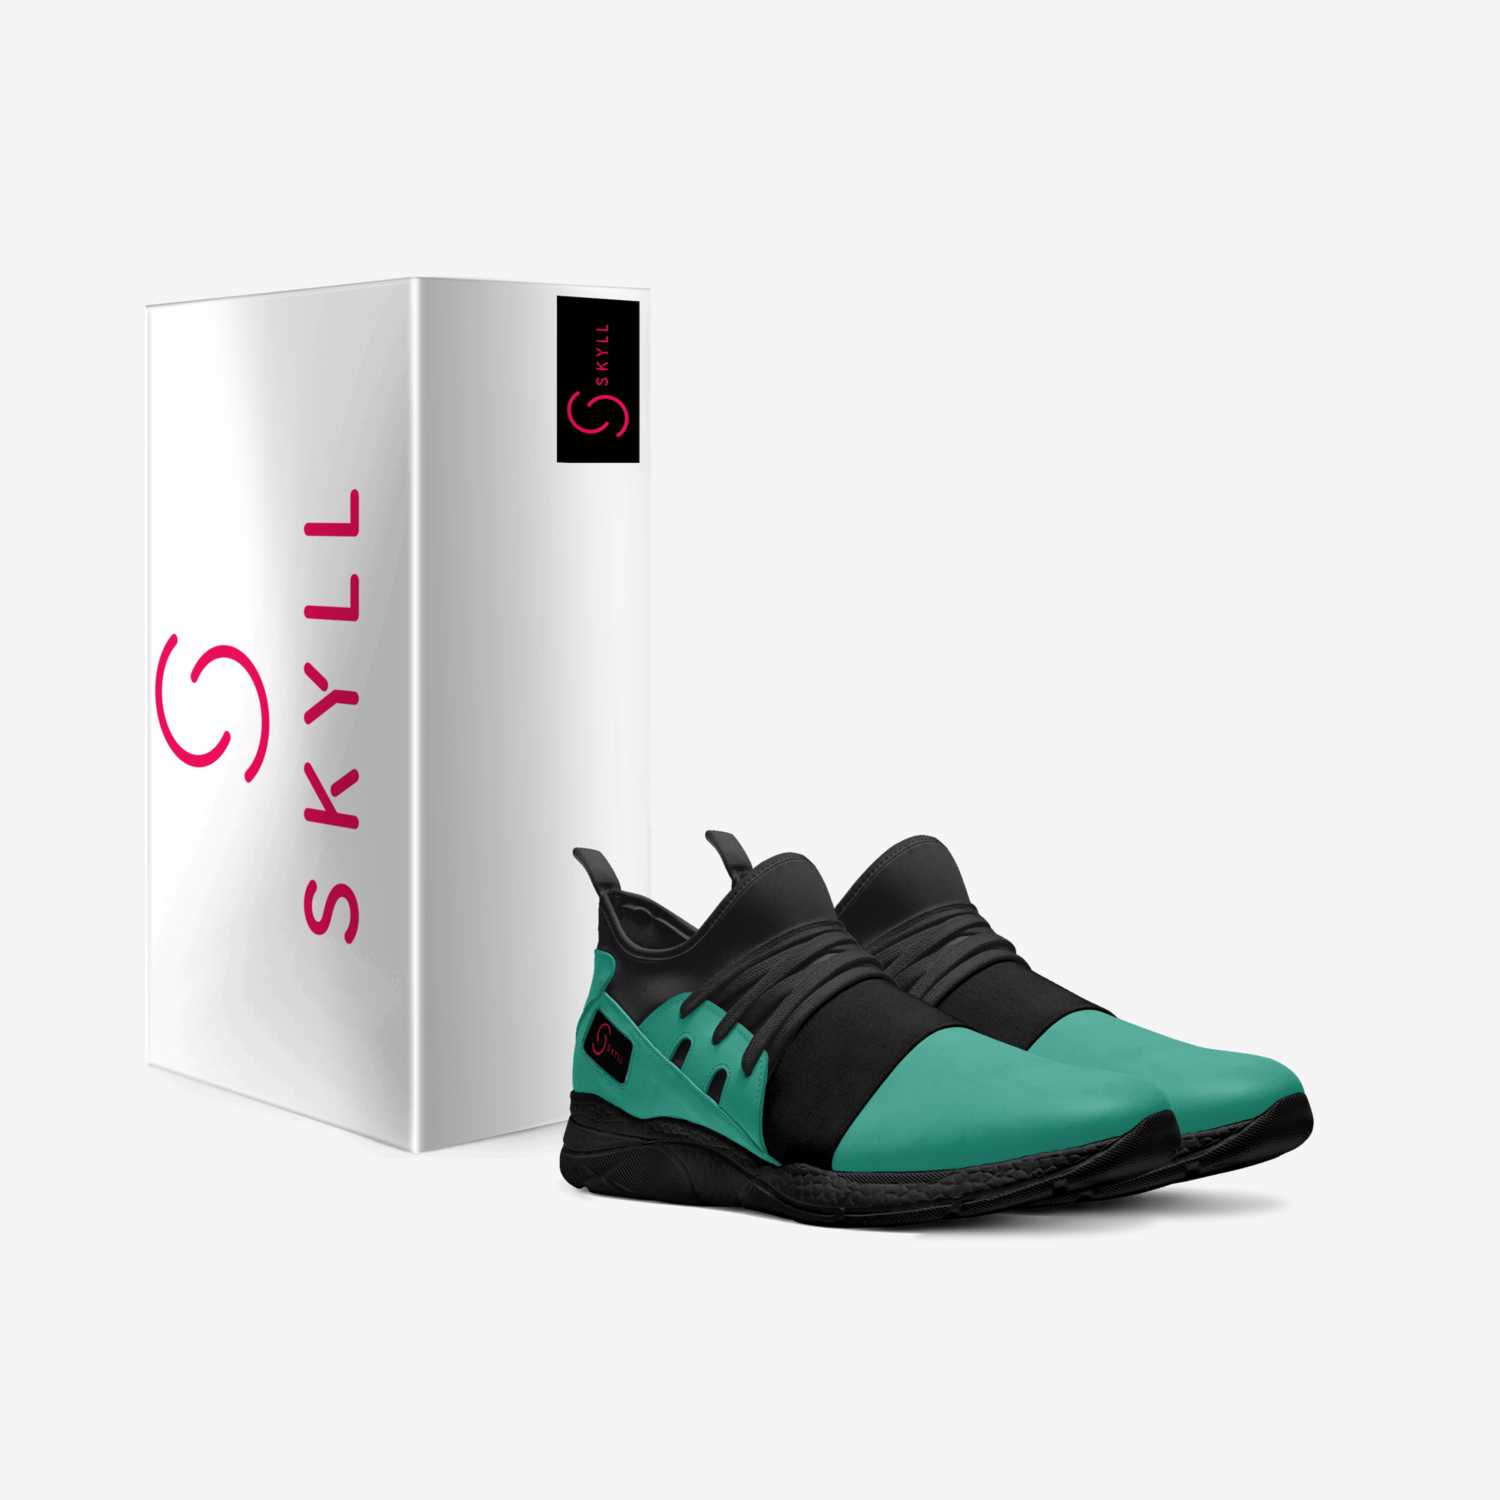 VLS2 custom made in Italy shoes by Skyll Lamine | Box view